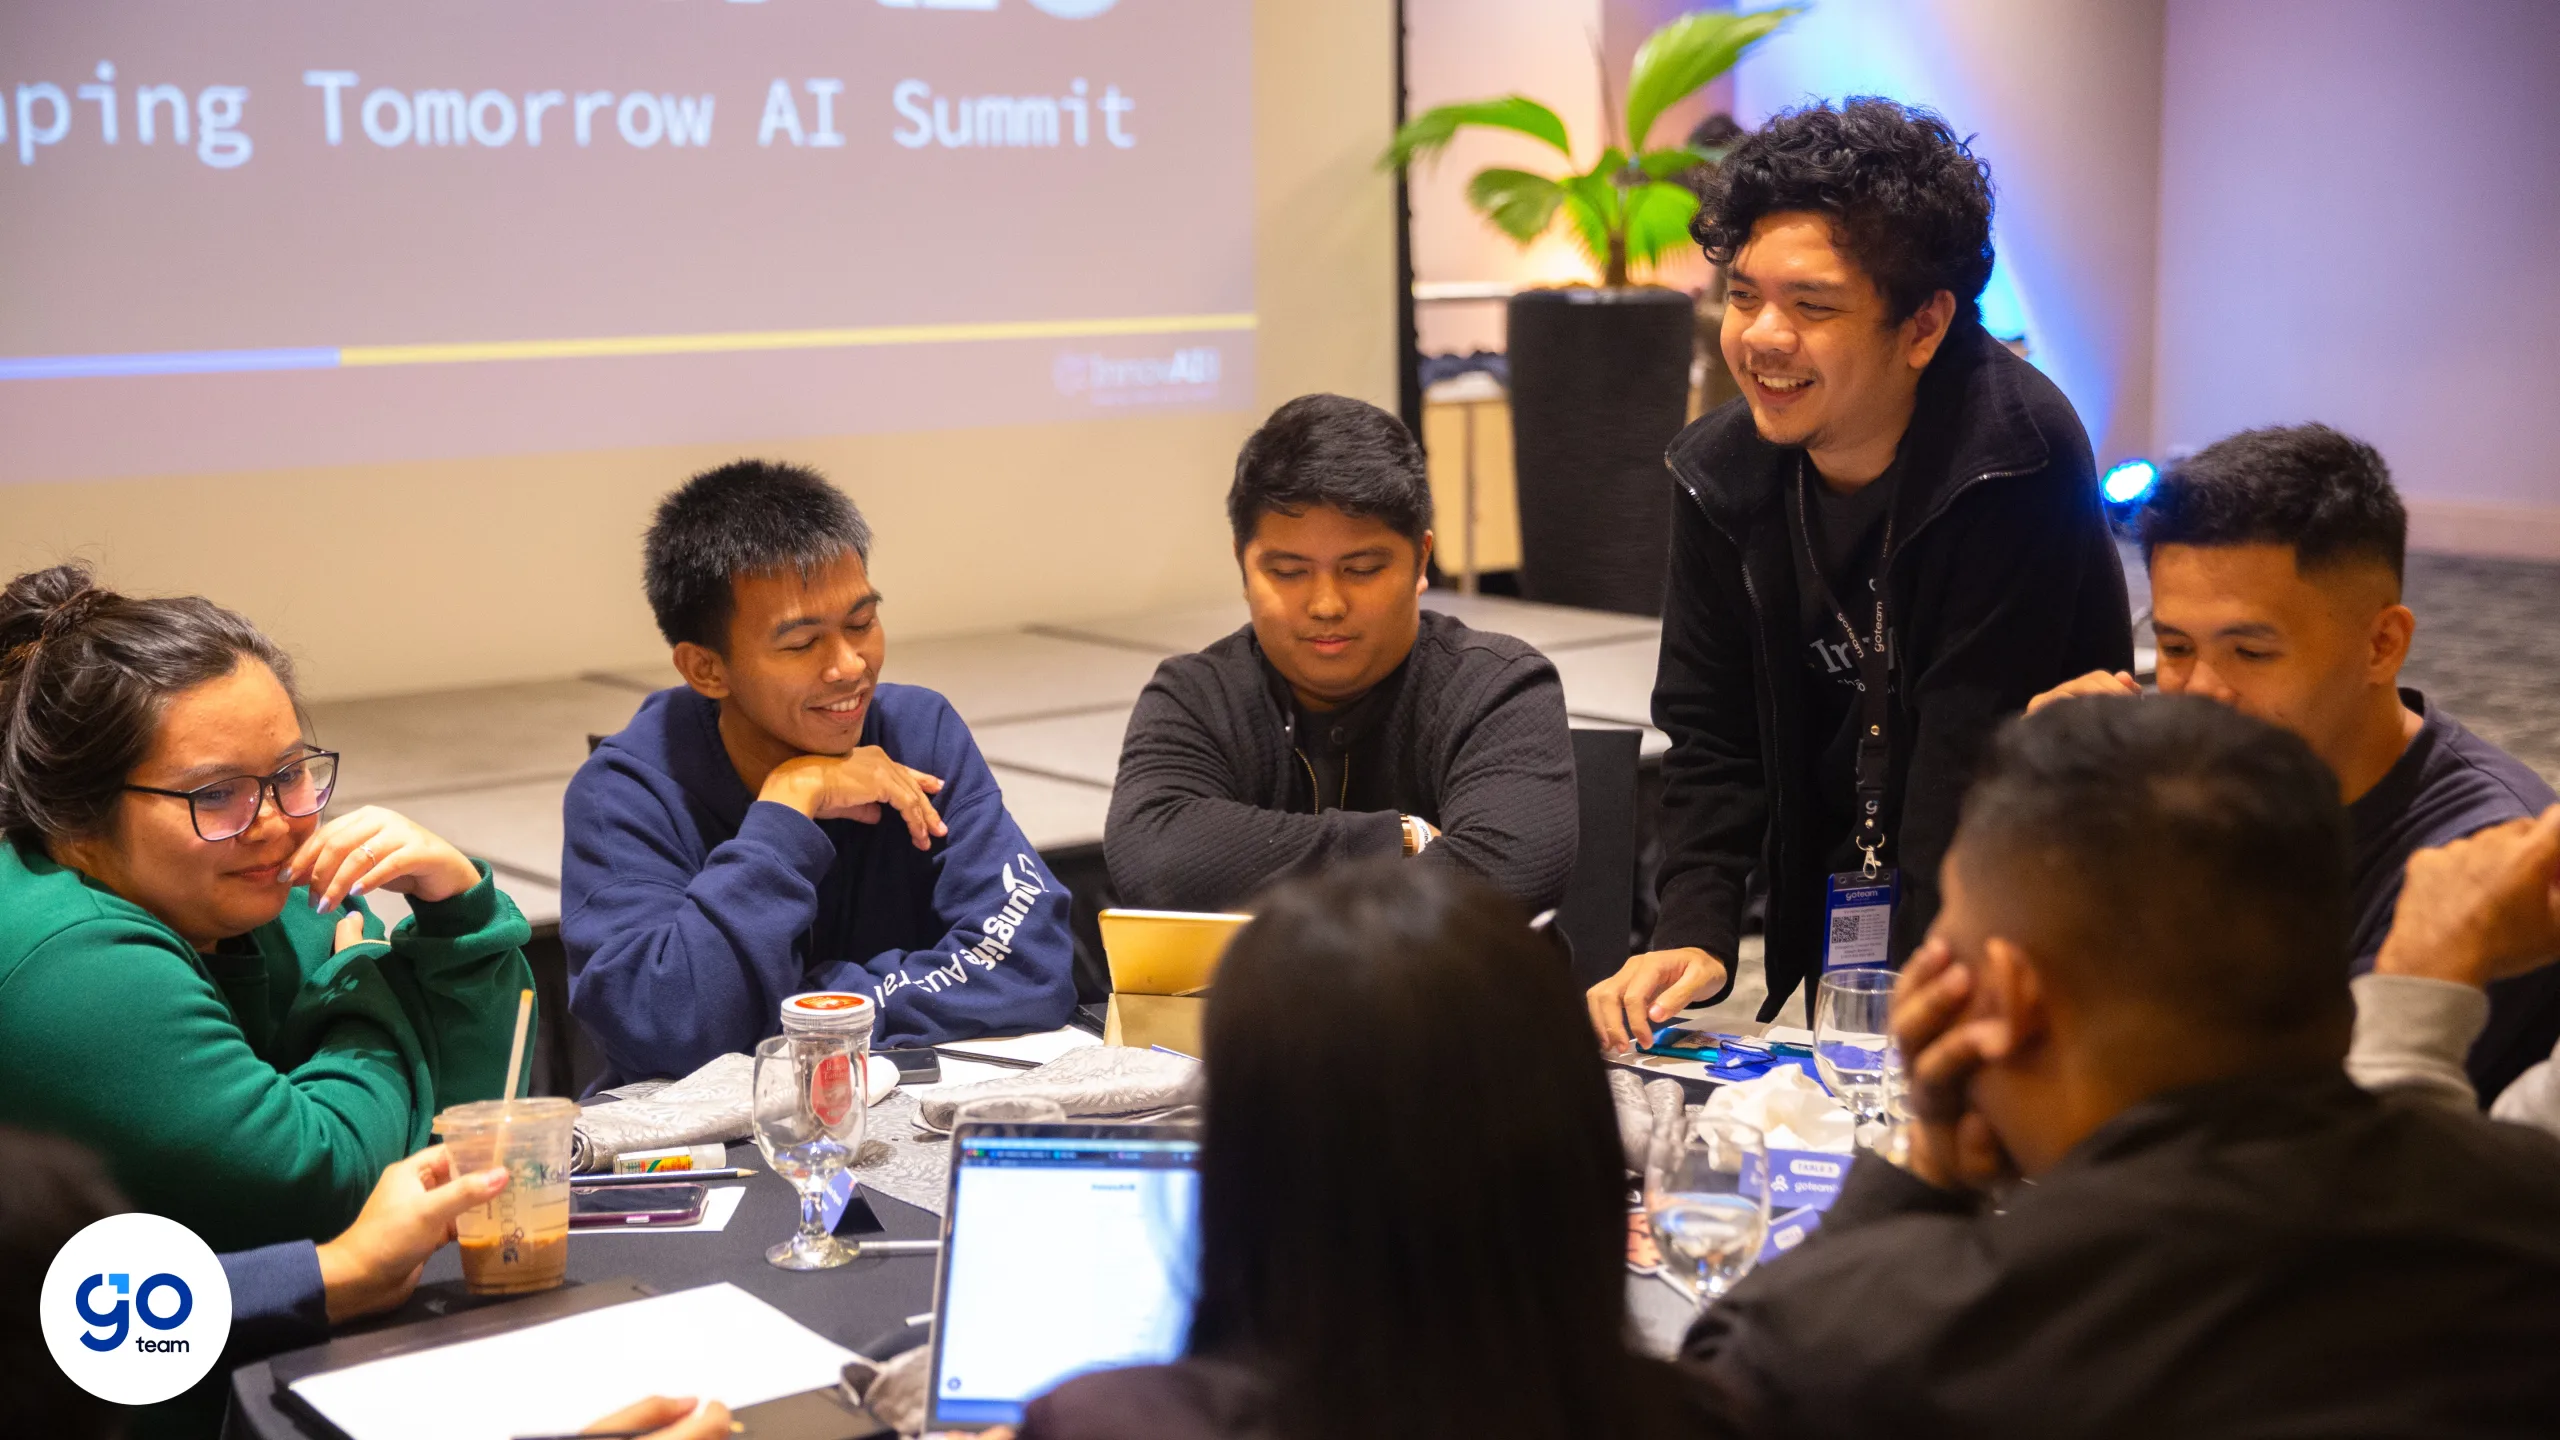 AI Summit Day 1 - Go Team Developers brainstorming